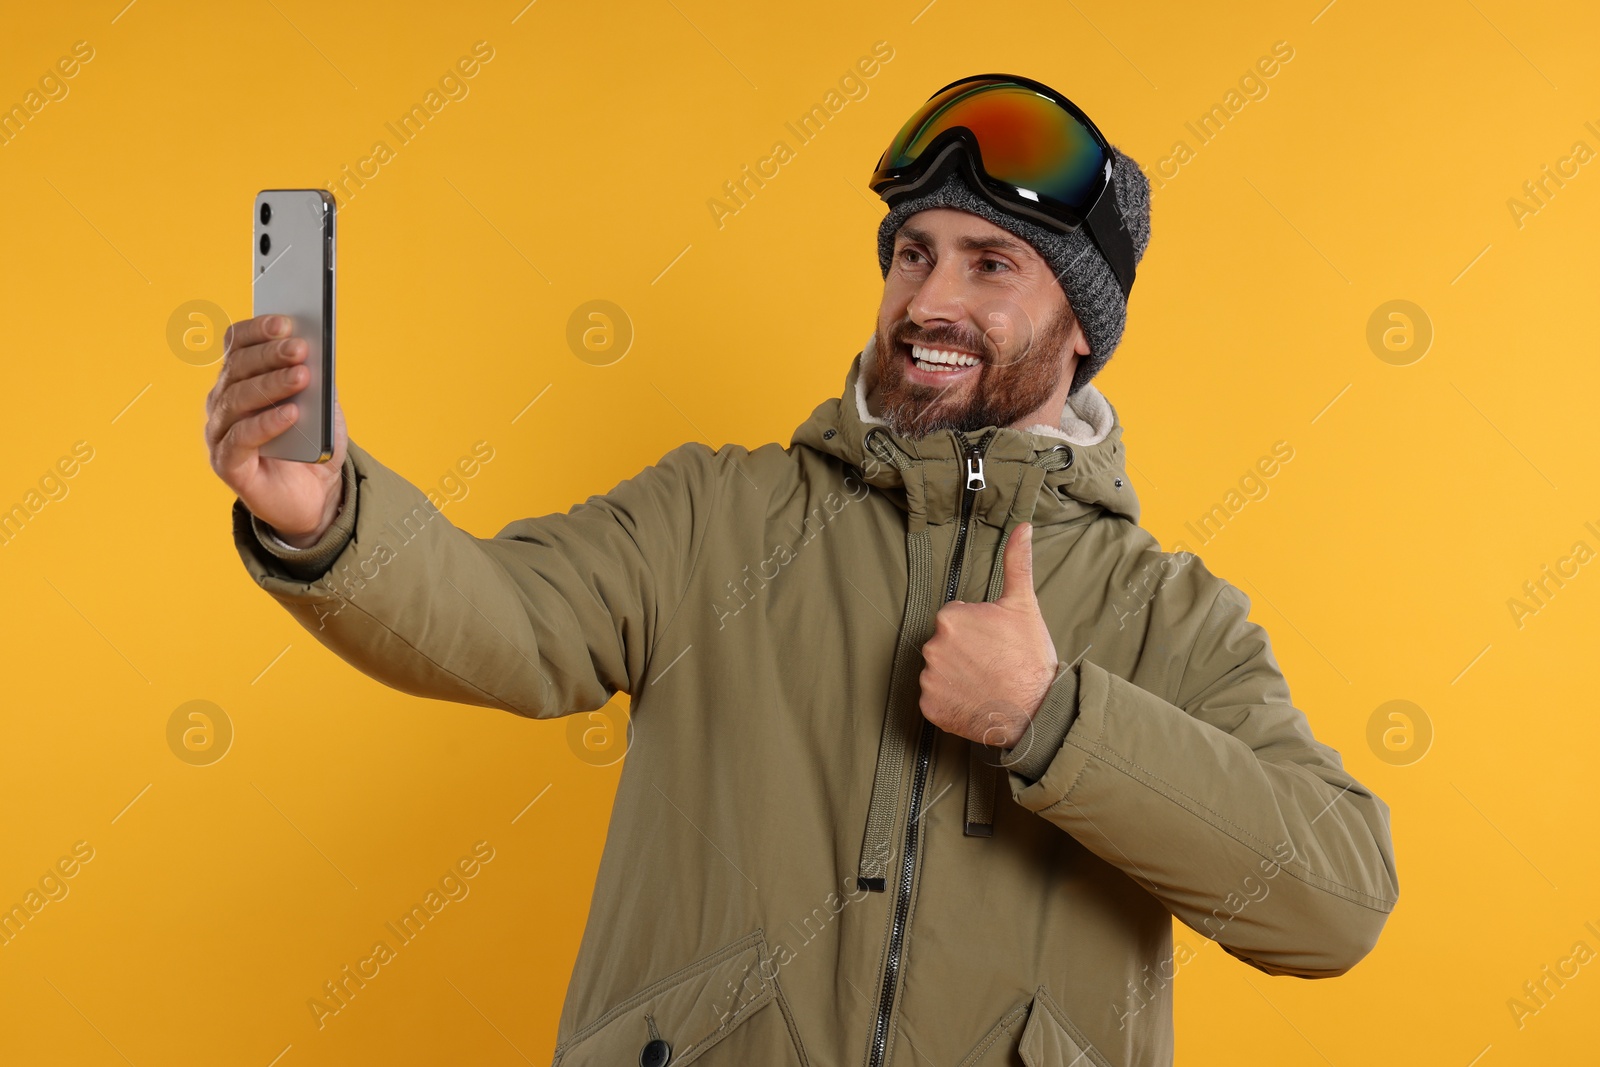 Photo of Winter sports. Happy man in ski suit and goggles taking selfie on orange background